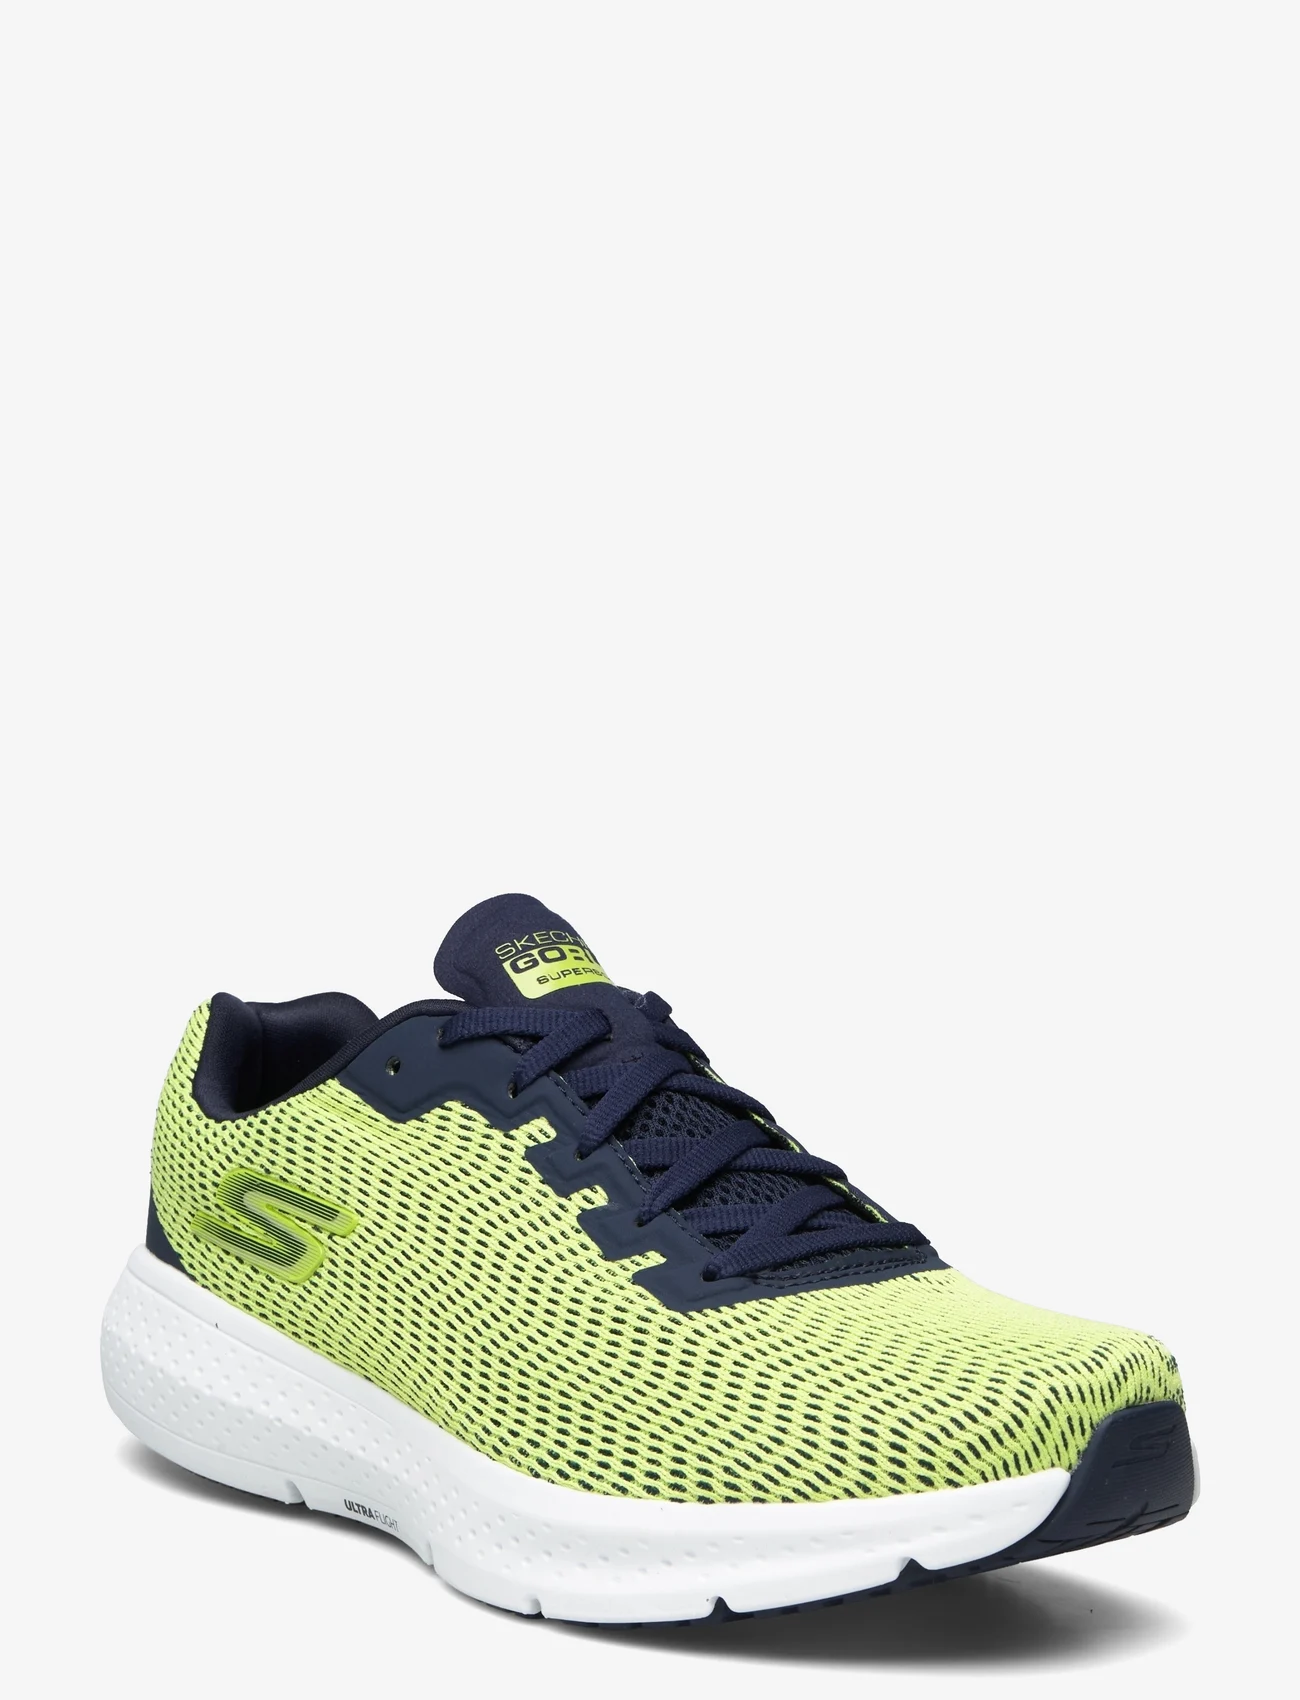 Skechers - Mens Go Run Supersonic  - Relaxed Fit - laufschuhe - ylnv yellow navy - 0